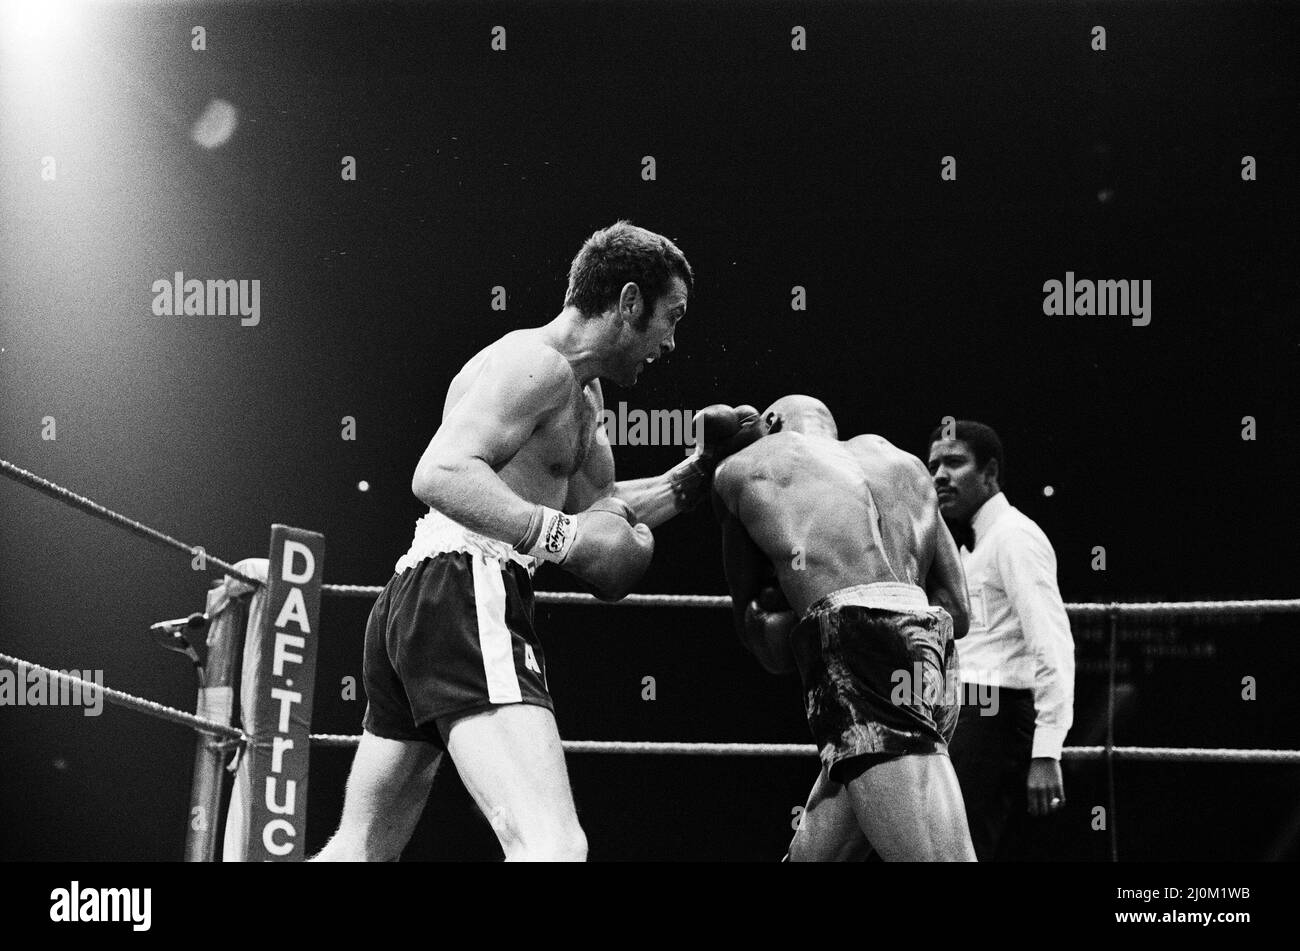 Alan Minter vs. Marvin Hagler, WBA and WBC world middleweight title fight, Wembley Arena, London, England.This was a grudge match in which Hagler won by TKO in the third round. Hagler went six years undefeated before losing his titles to Sugar Ray Leonard in 1987. (Picture Shows) Fight action. 27th September 1980 Stock Photo